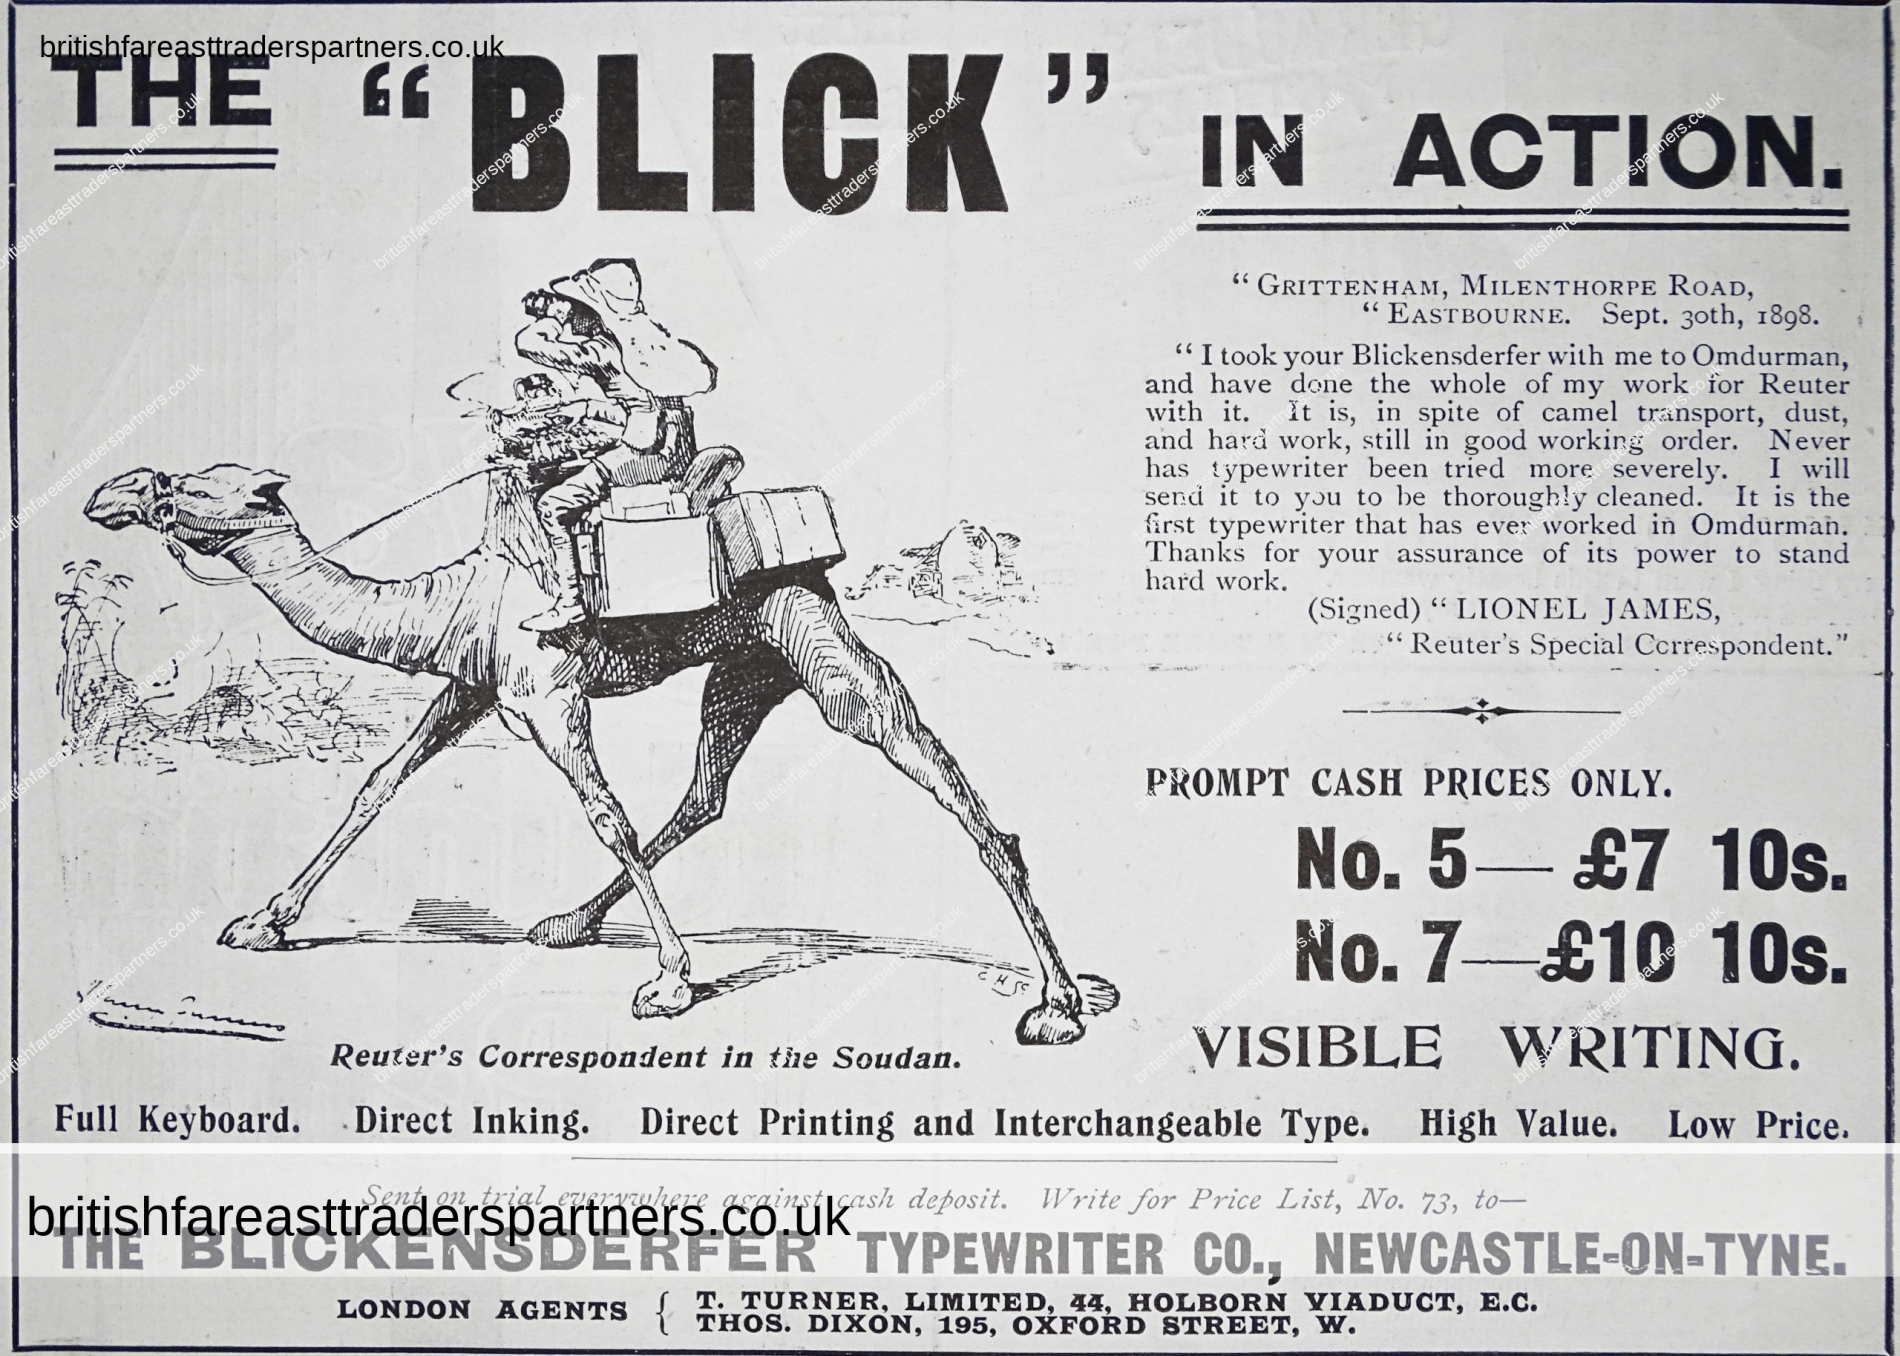 ANTIQUE 1900 BLICKENSDERFER TYPEWRITER CO. NEWCASTLE-ON-TYNE THE”BLICK”IN ACTION Lionel James Reuter’s Special Correspondent in the SOUDAN  Illustrated London News COLLECTABLE EPHEMERA Advertisement